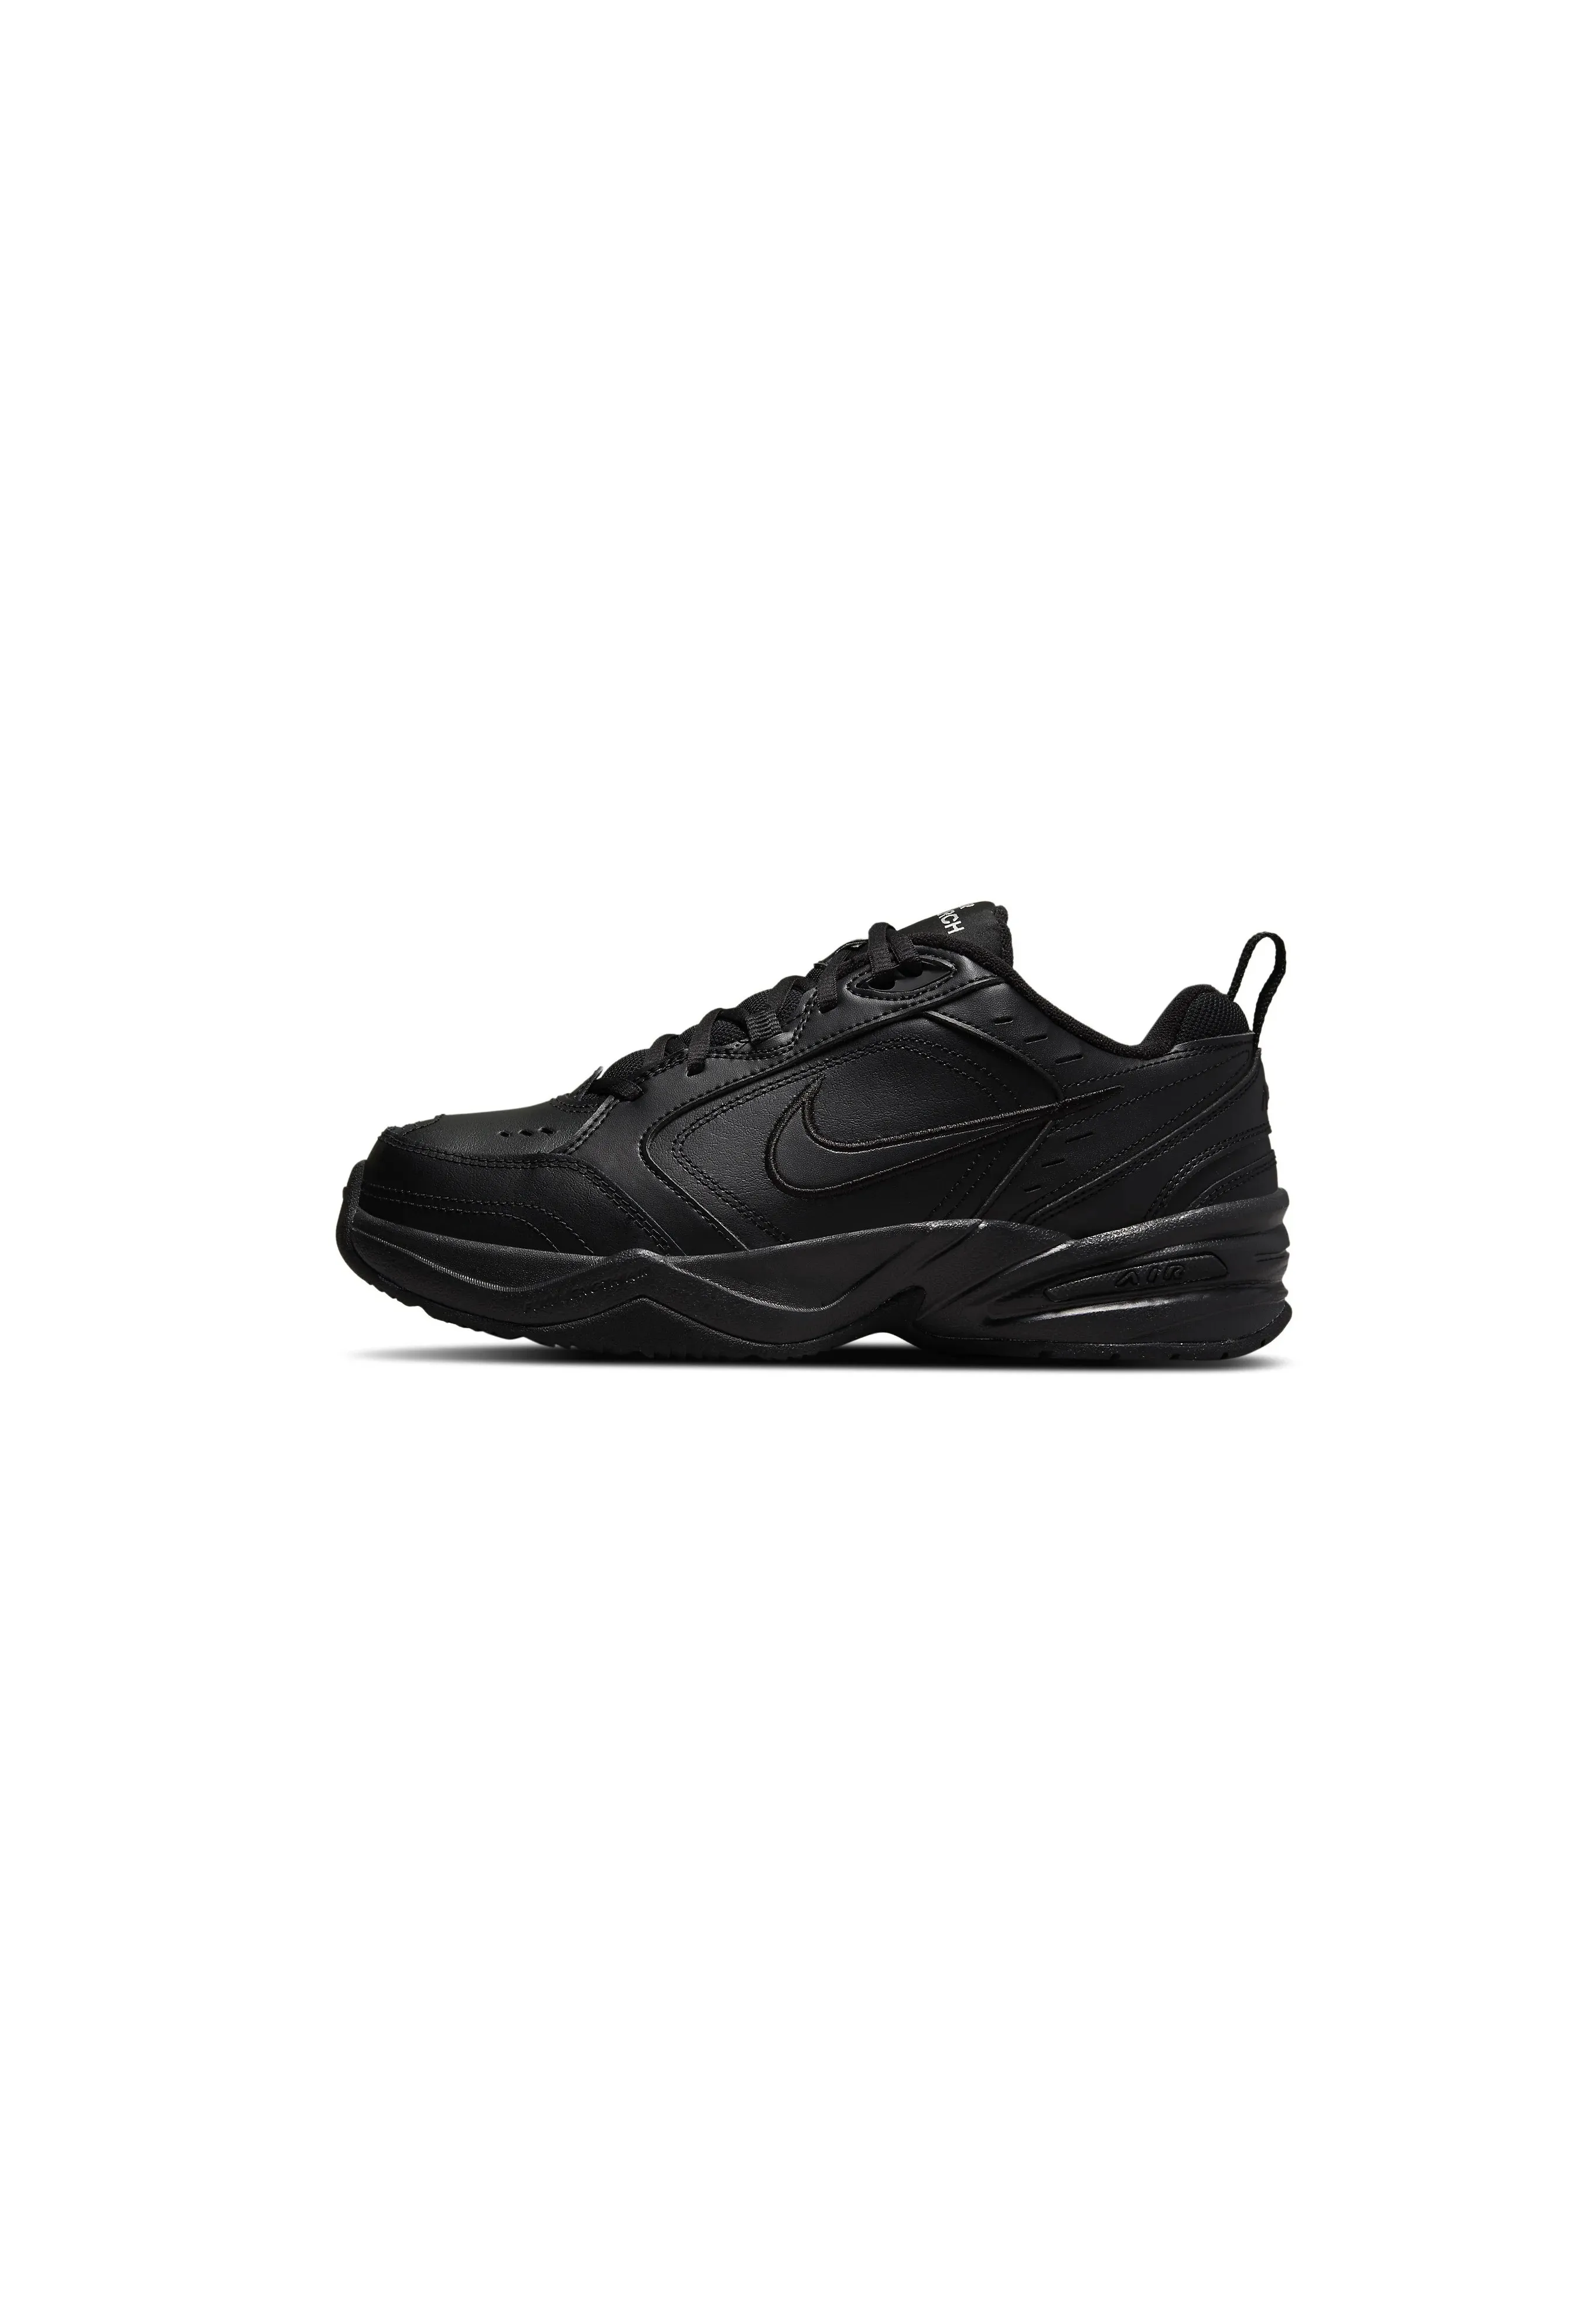 LIFESTYLE AIR MONARCH IV EXTRA WIDE